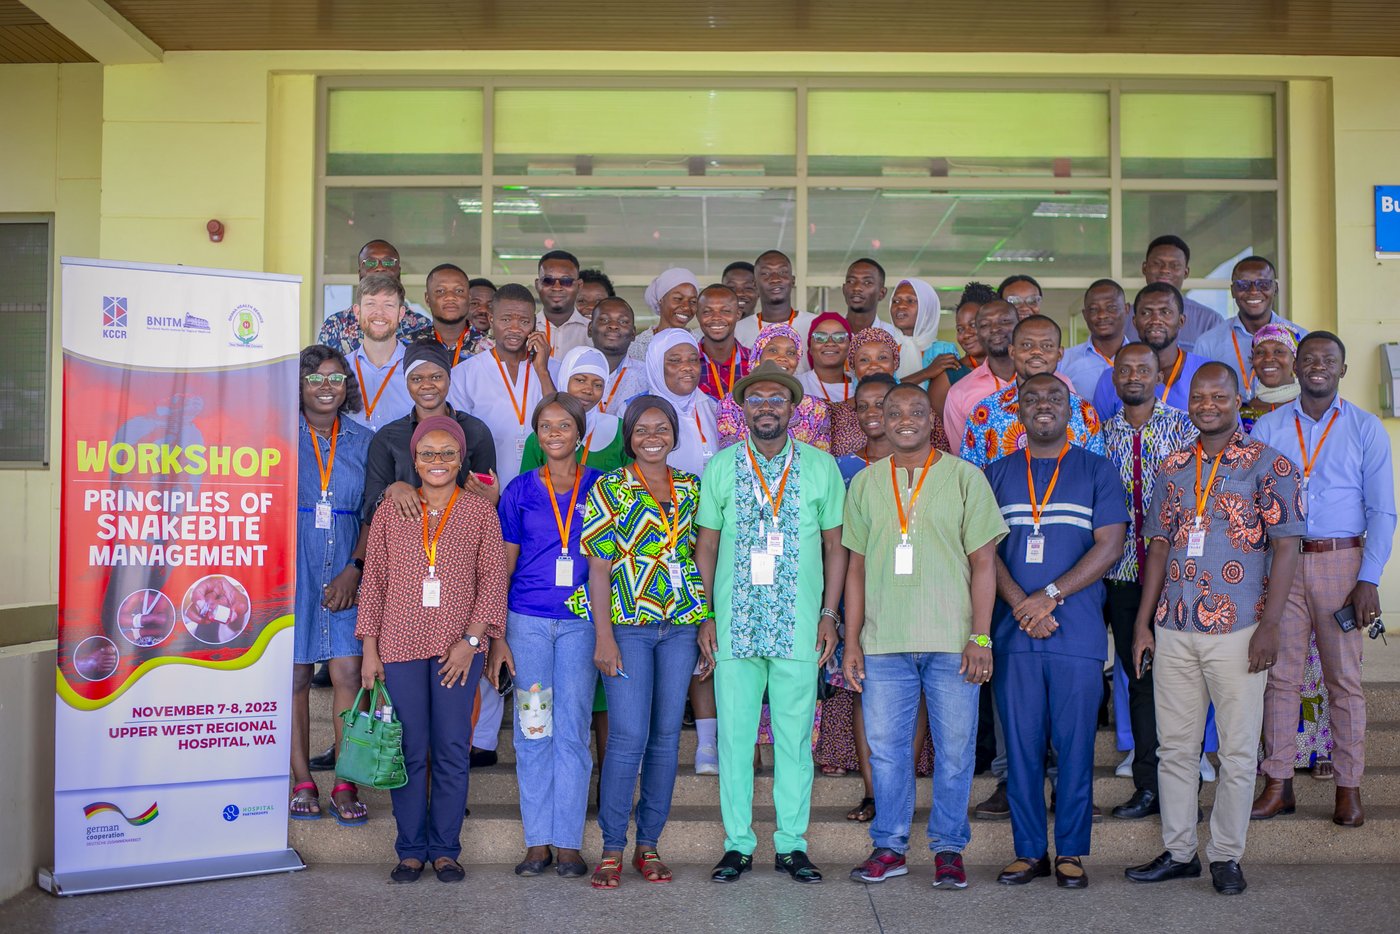 The picture shows a group of people standing in front of a hospital entrance next to a banner which says 'Workshop - Principles of Snakebite Mangement'. Everyone is looking friendly into the camera.